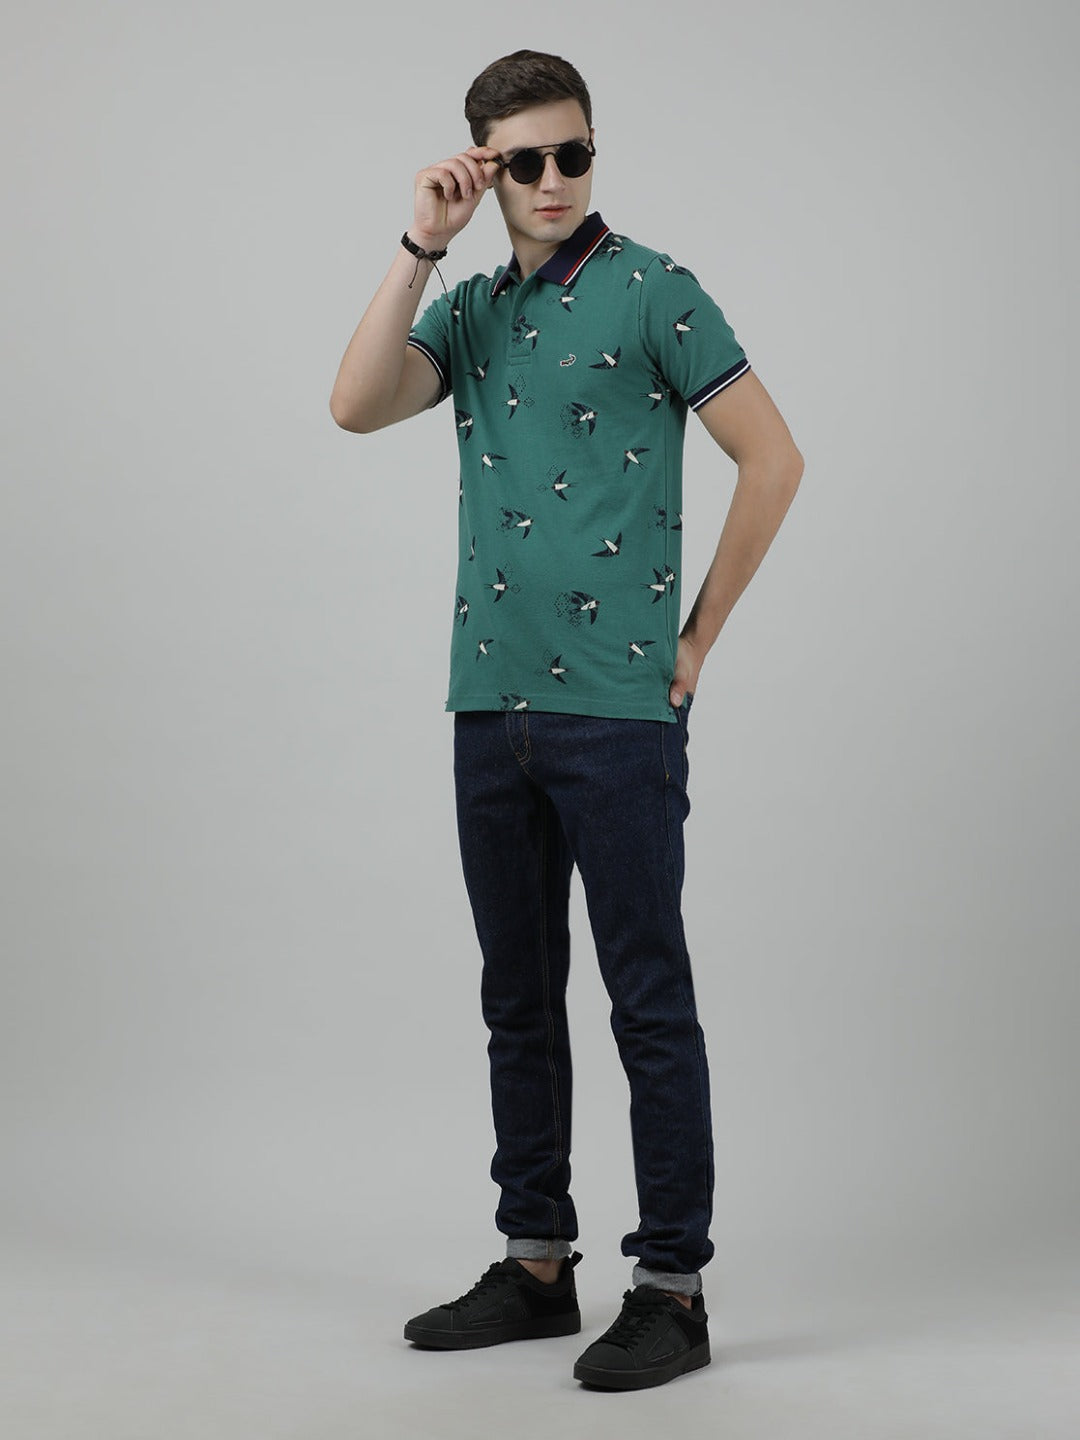 Crocodile Casual Green T-Shirt Polo Printed Half Sleeve Slim Fit with Collar for Men